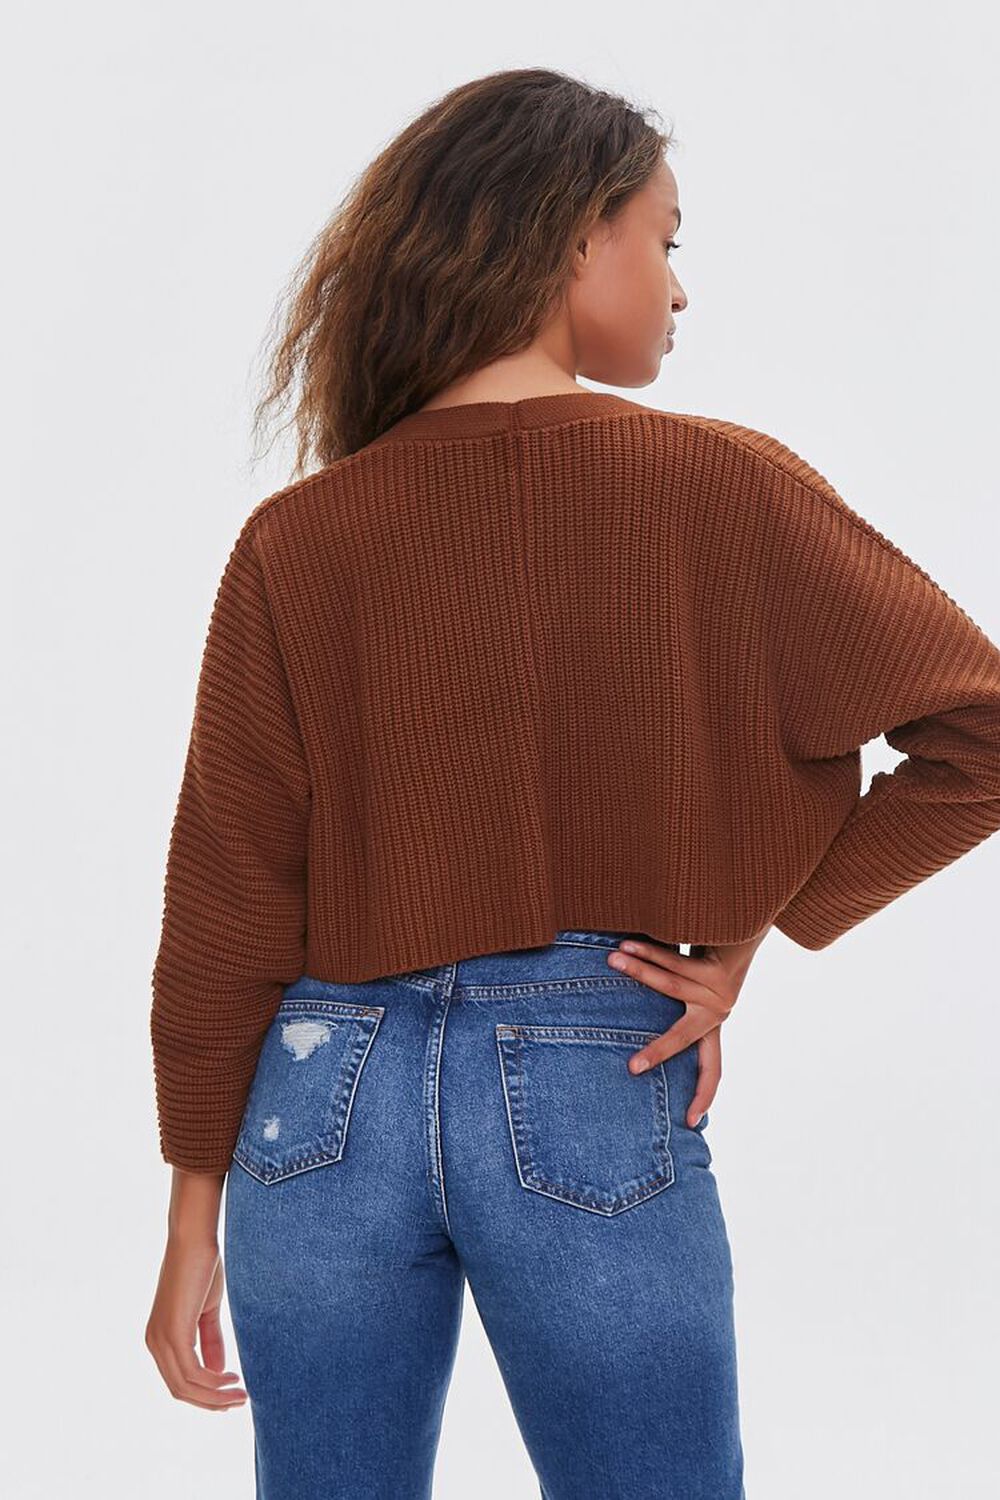 BROWN Ribbed Cropped Cardigan Sweater, image 3